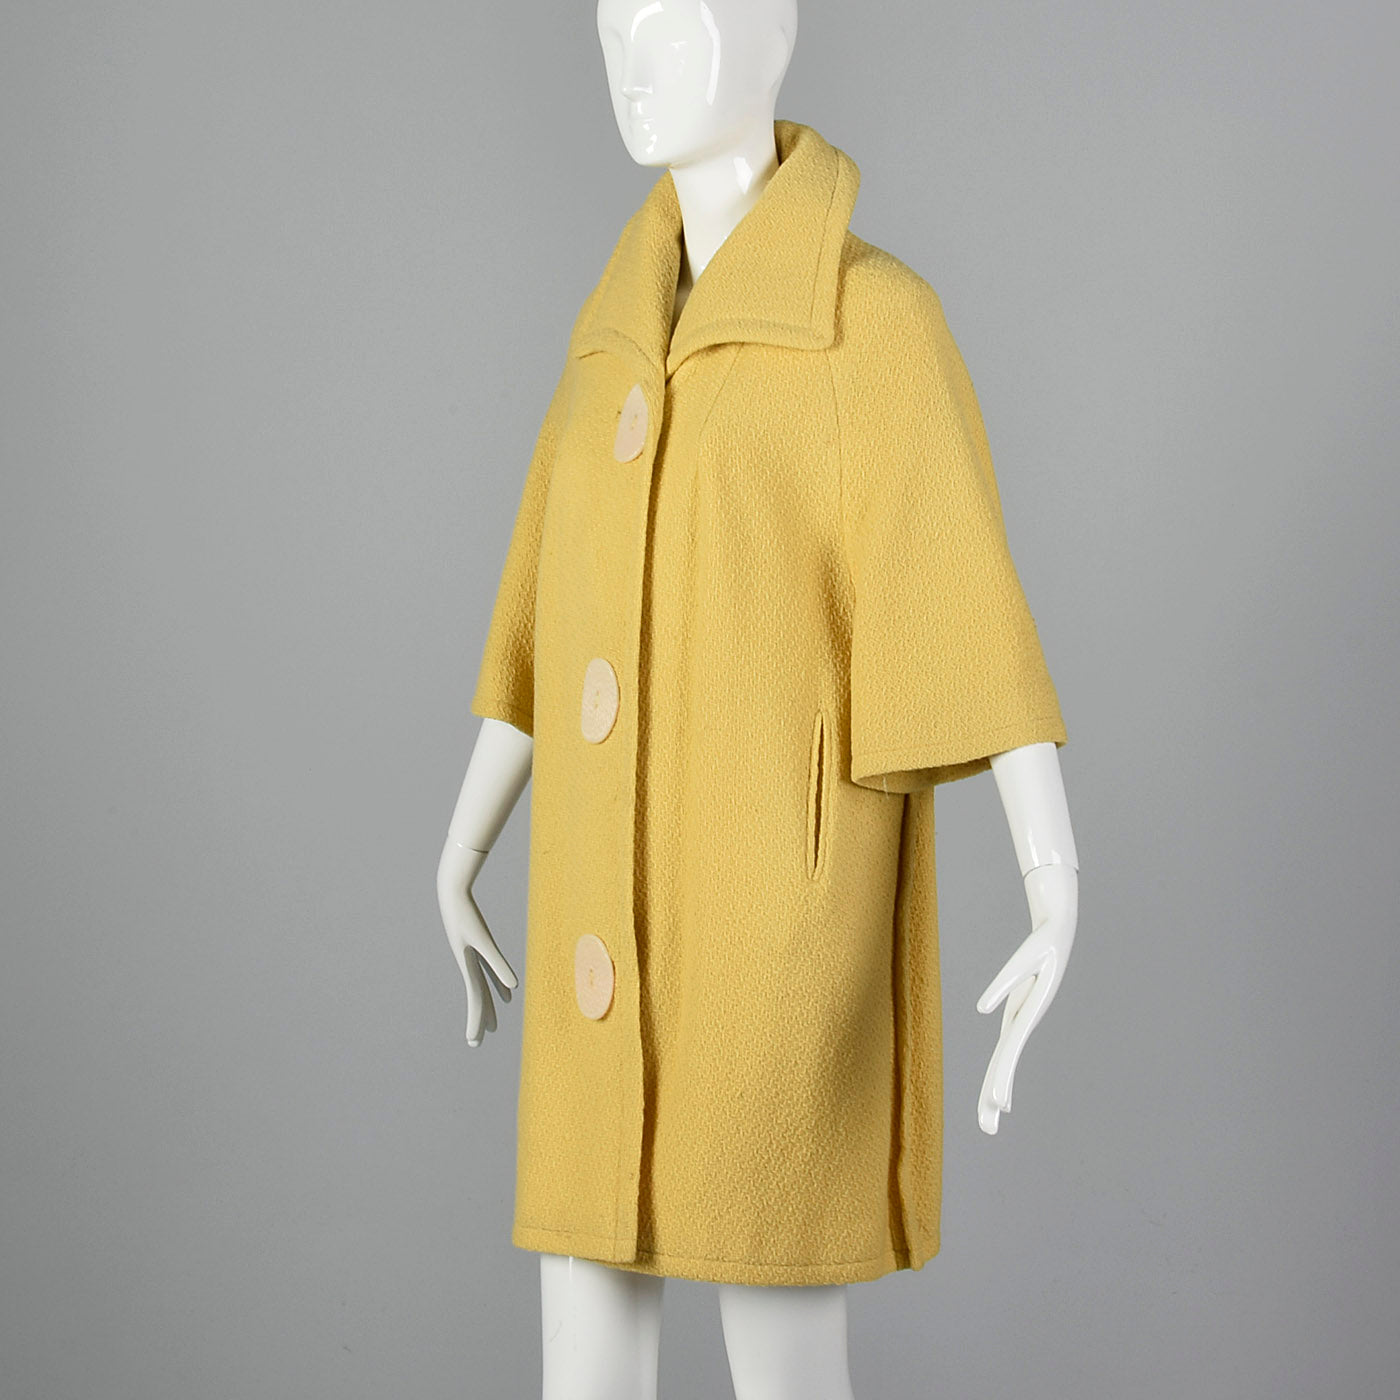 1960s Yellow Jacket with Huge Buttons